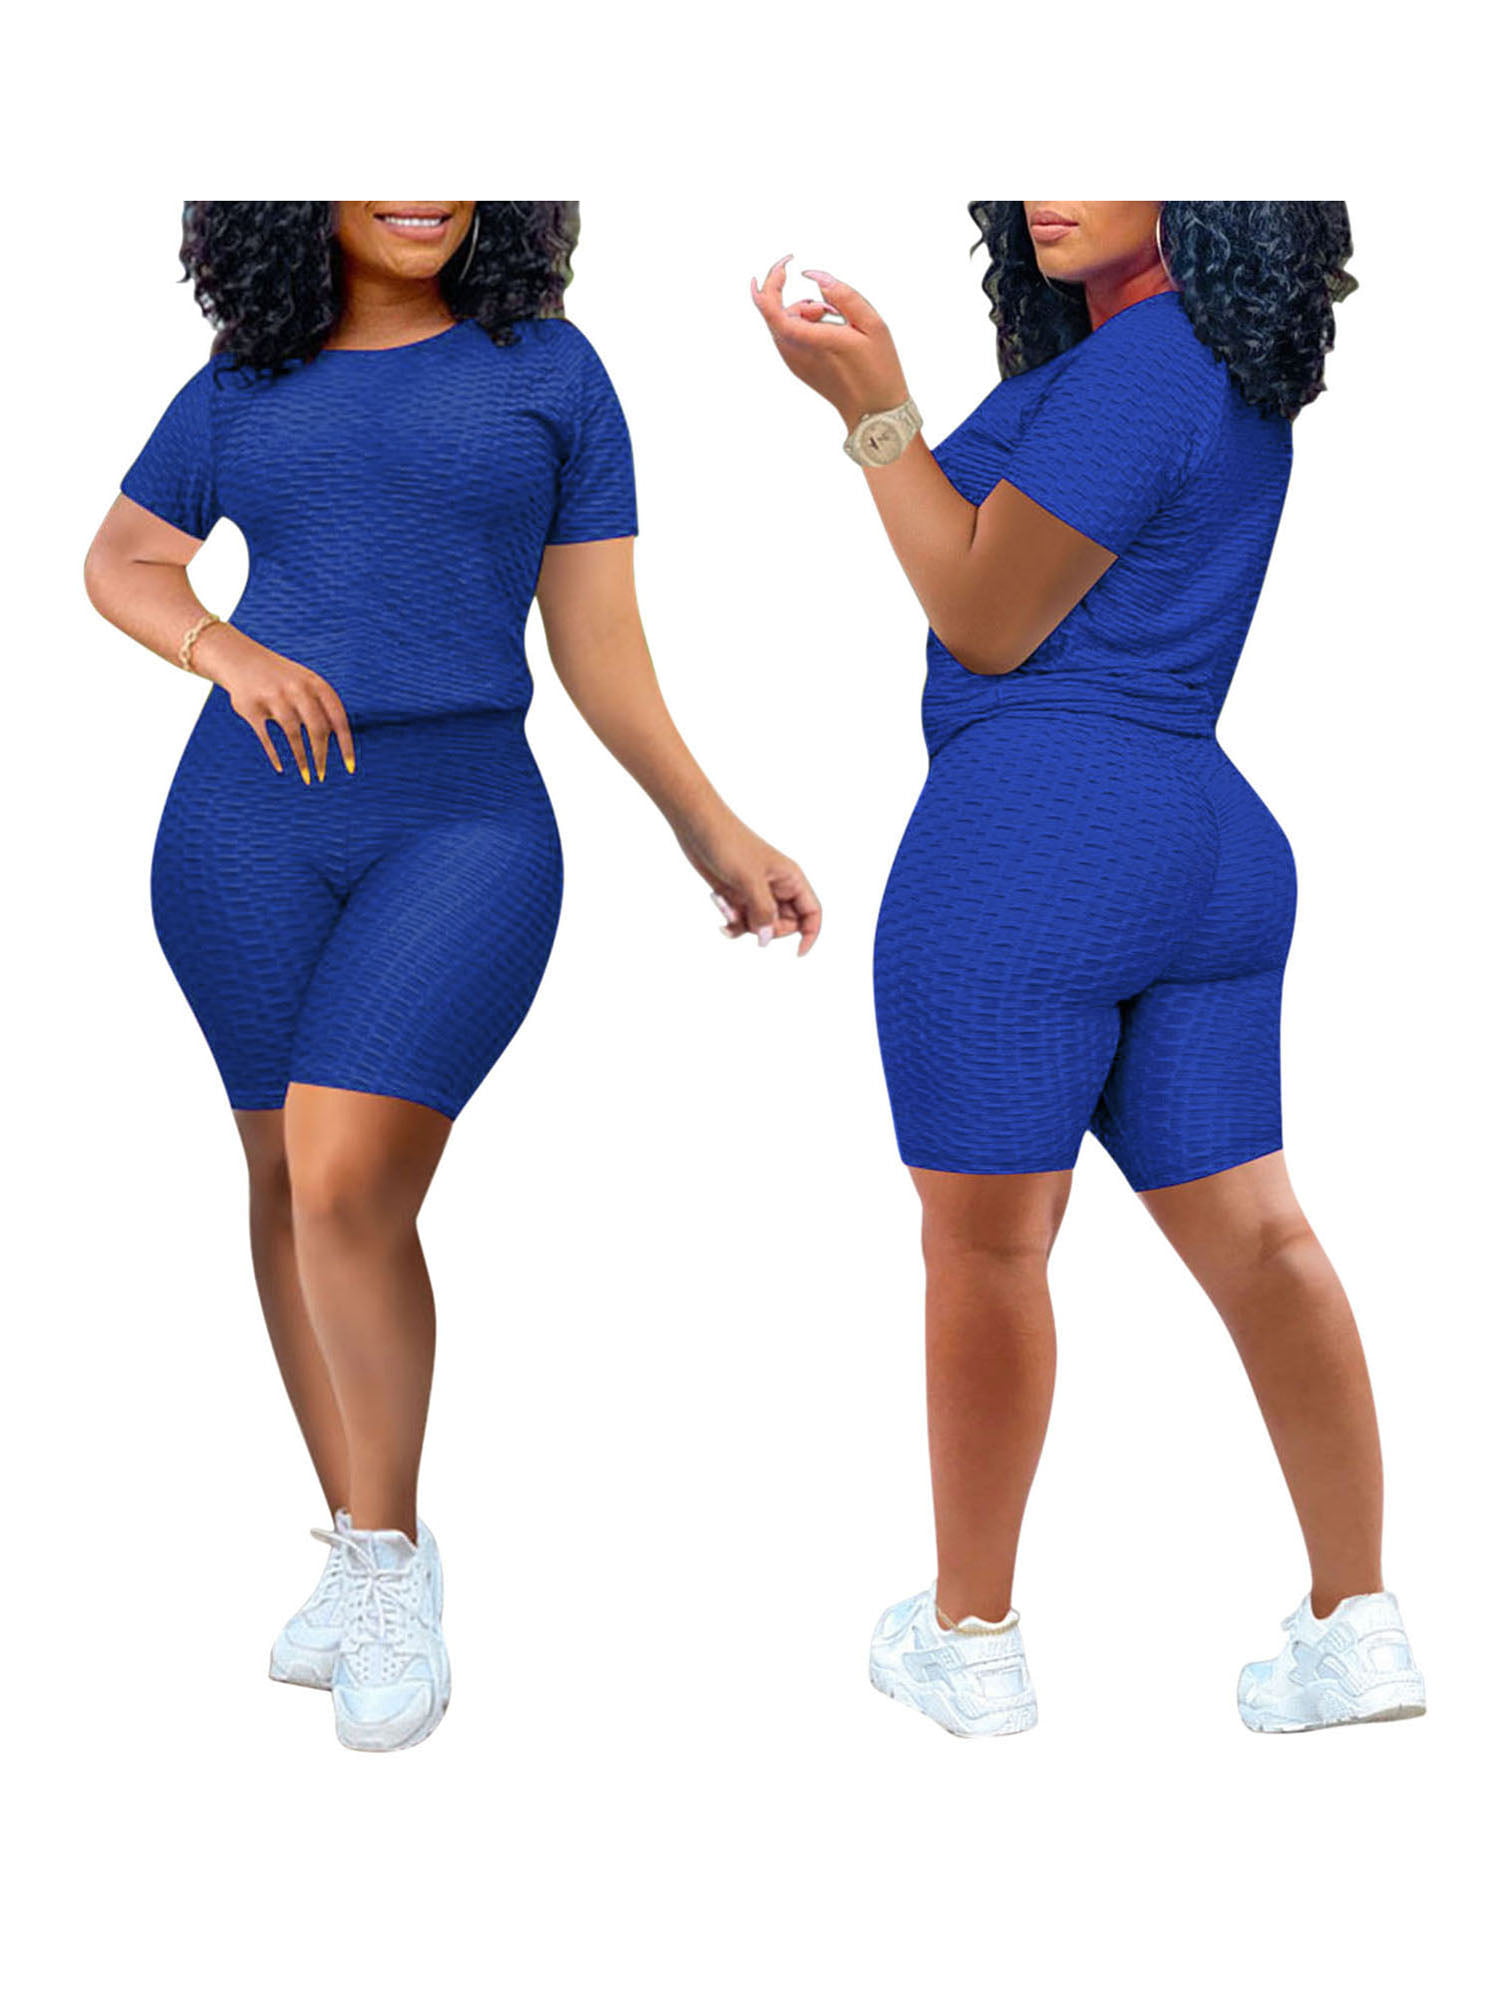 Pudcoco Womens 2 Pcs Yoga Outfits Bubble Textured Tracksuit Short Sleeve  T-Shirt High Waist Hip Lifting Anti Cellulite Legging 